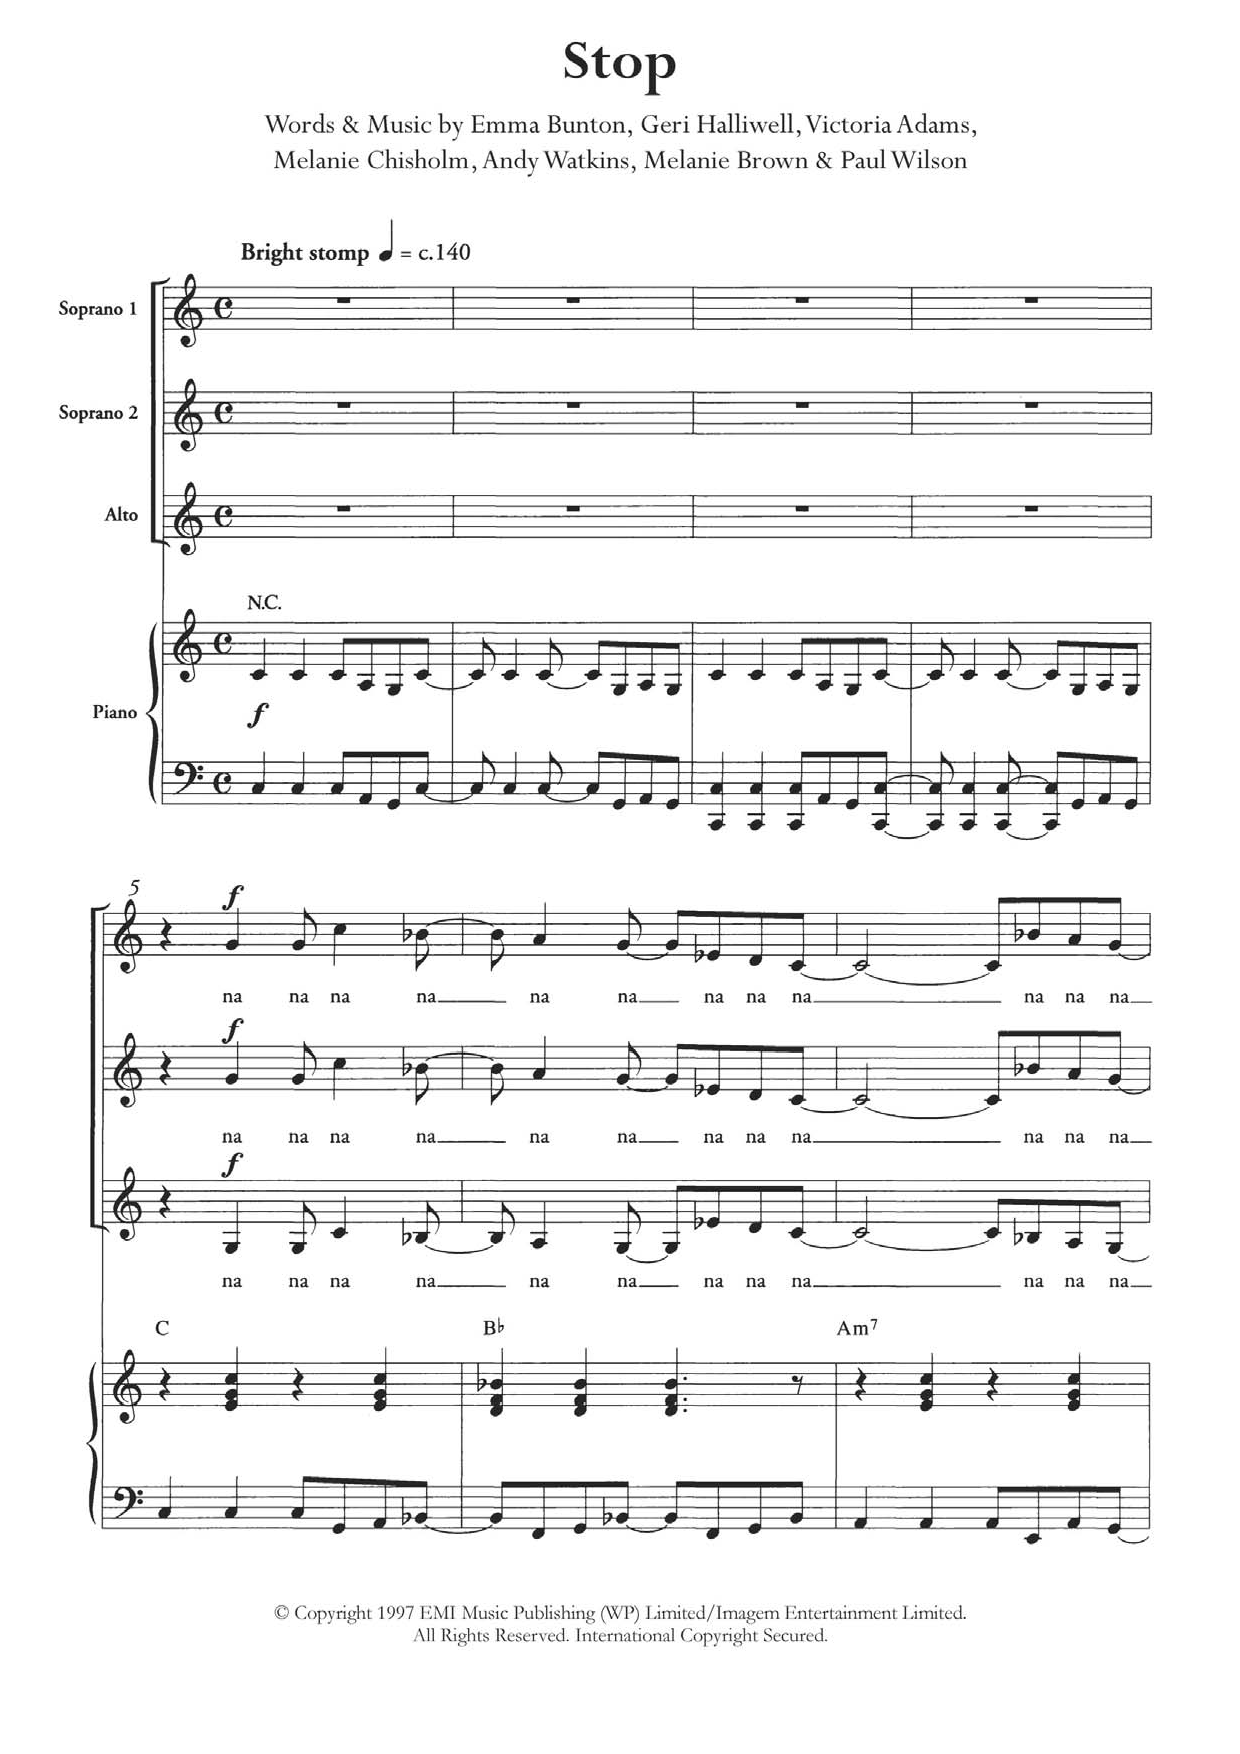 Download The Spice Girls Stop (arr. Berty Rice) Sheet Music